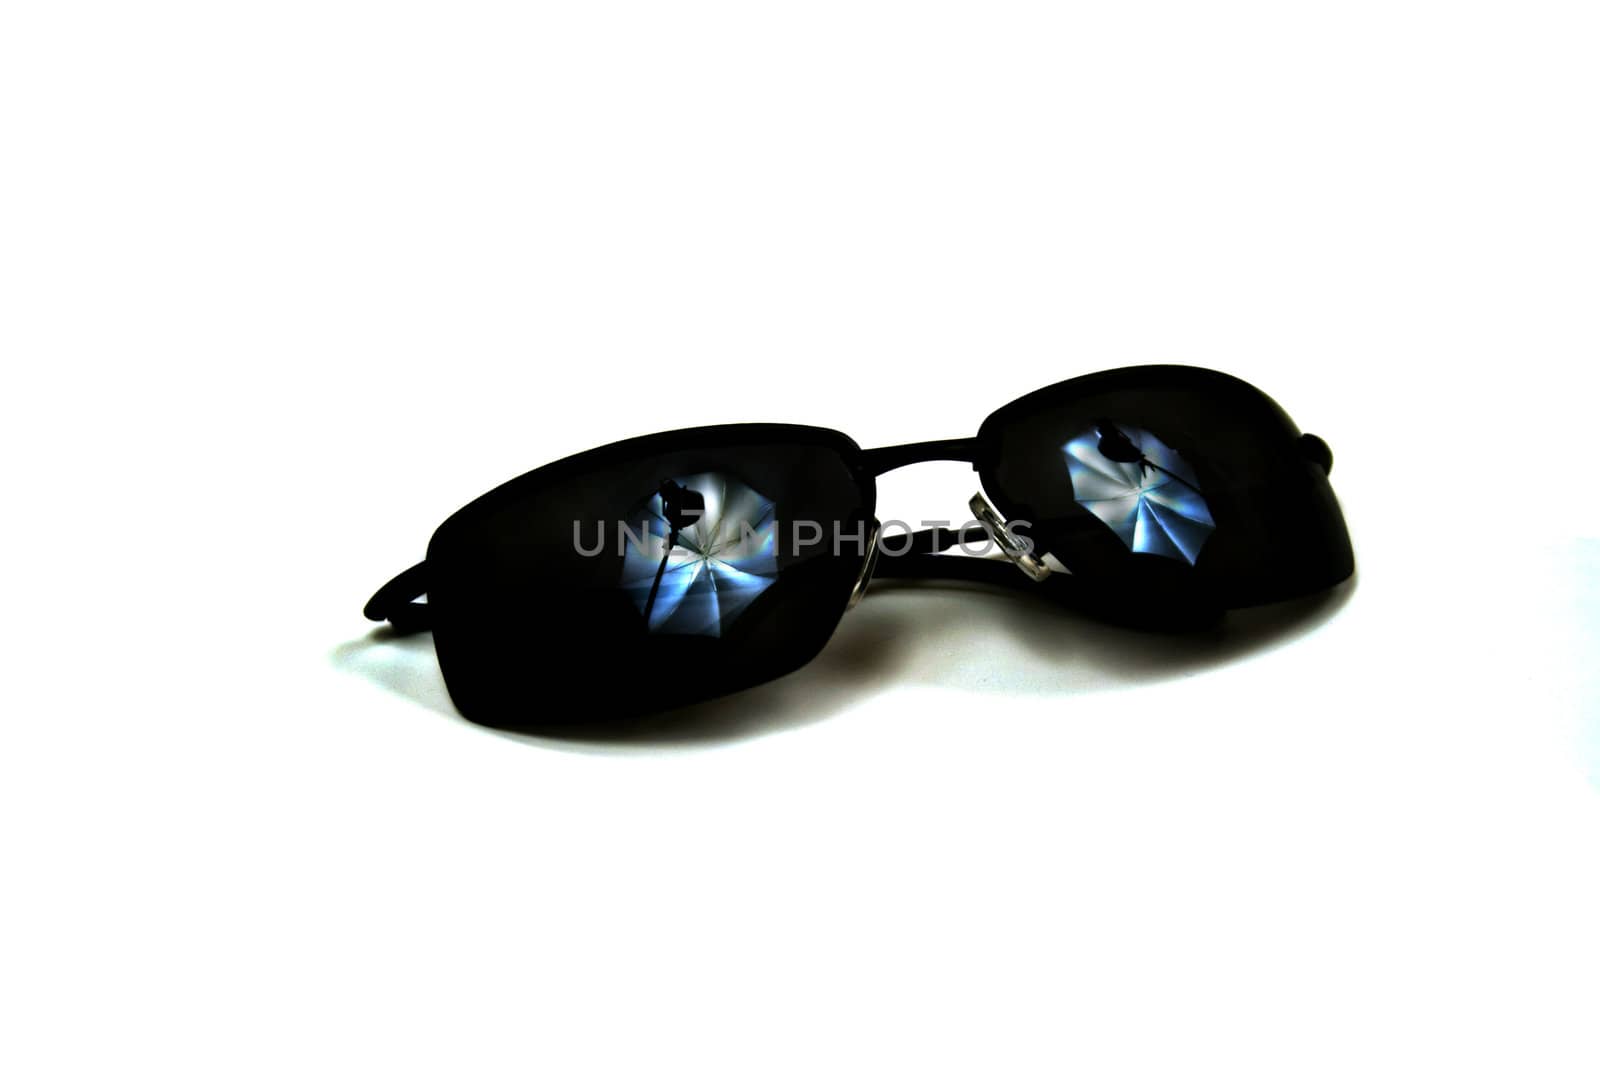 Sunglasses with Studio Lighting was created to  show a photographer's studio lights reflection in the lenses of the sunglasses when adjusted to the proper orientation. This is an abstract representation.
